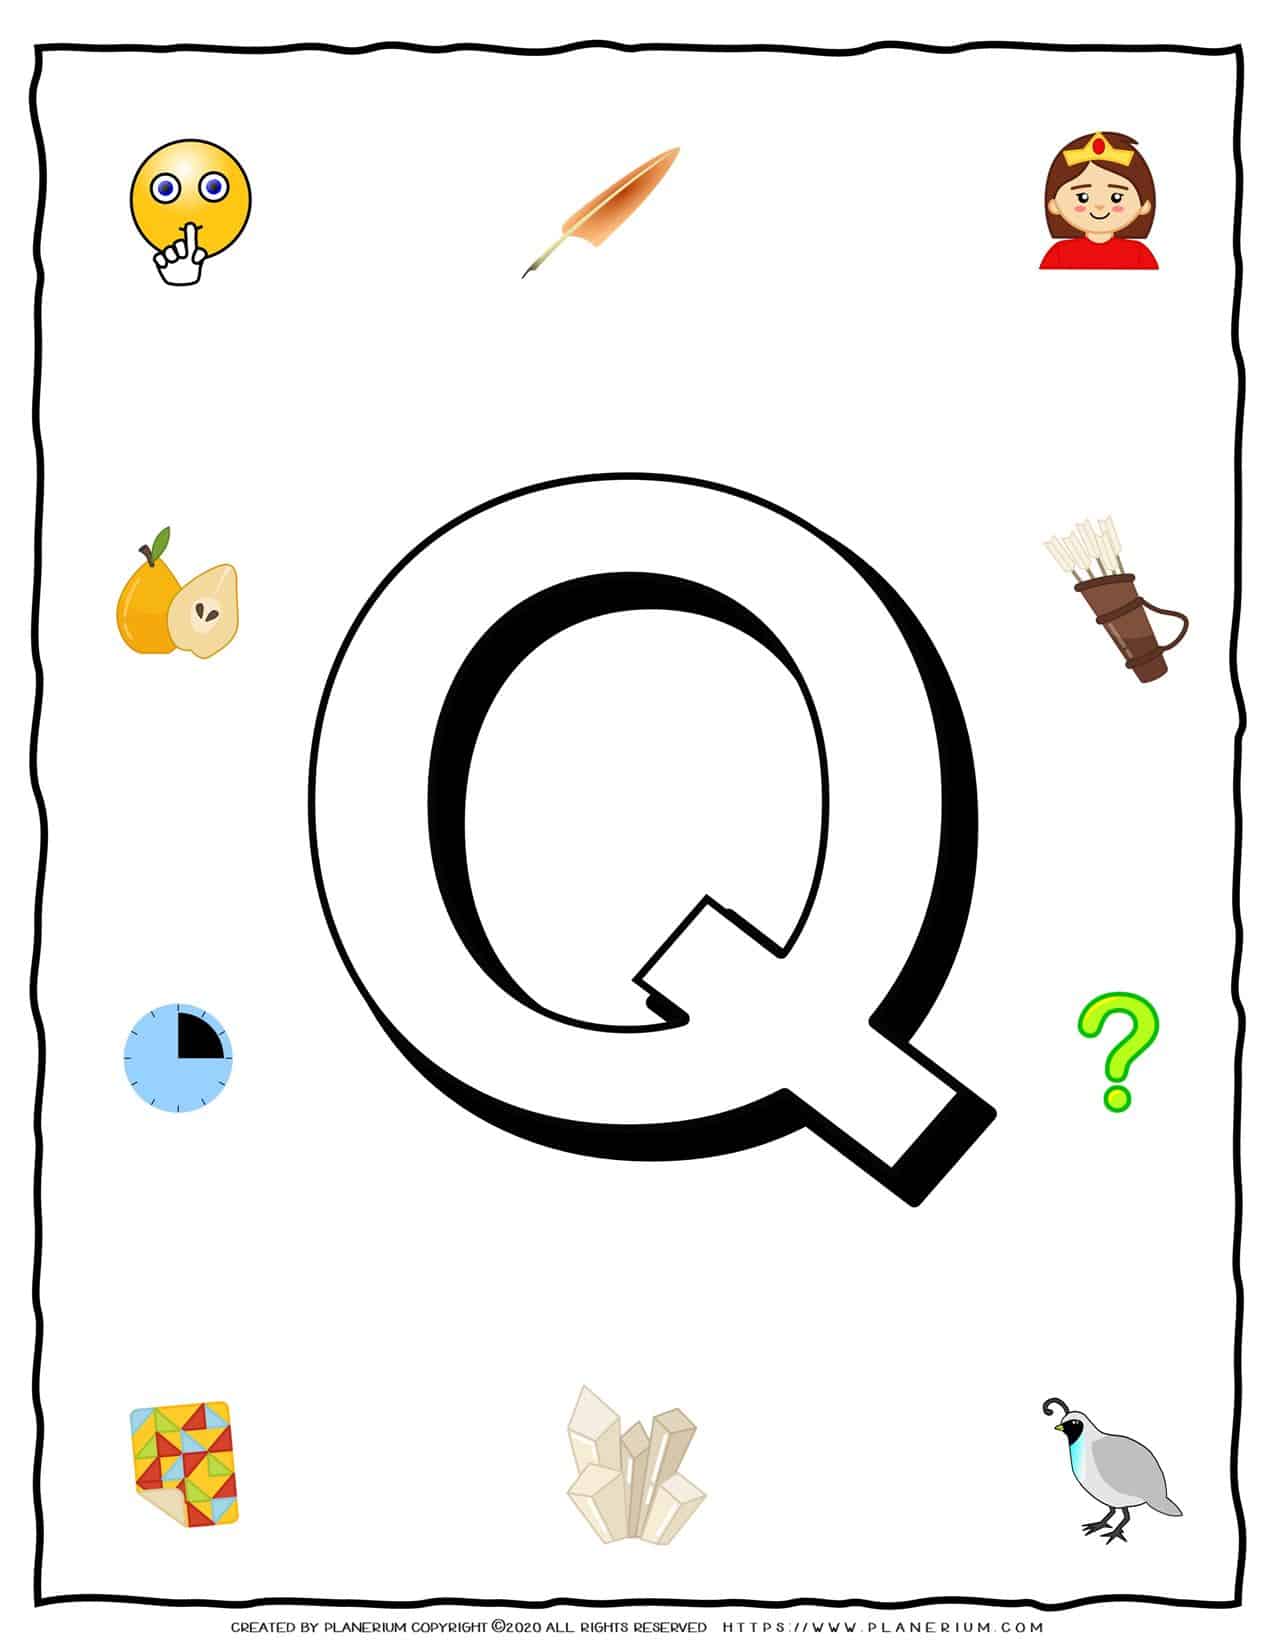 English Alphabet - Objects that starts with Q | Planerium